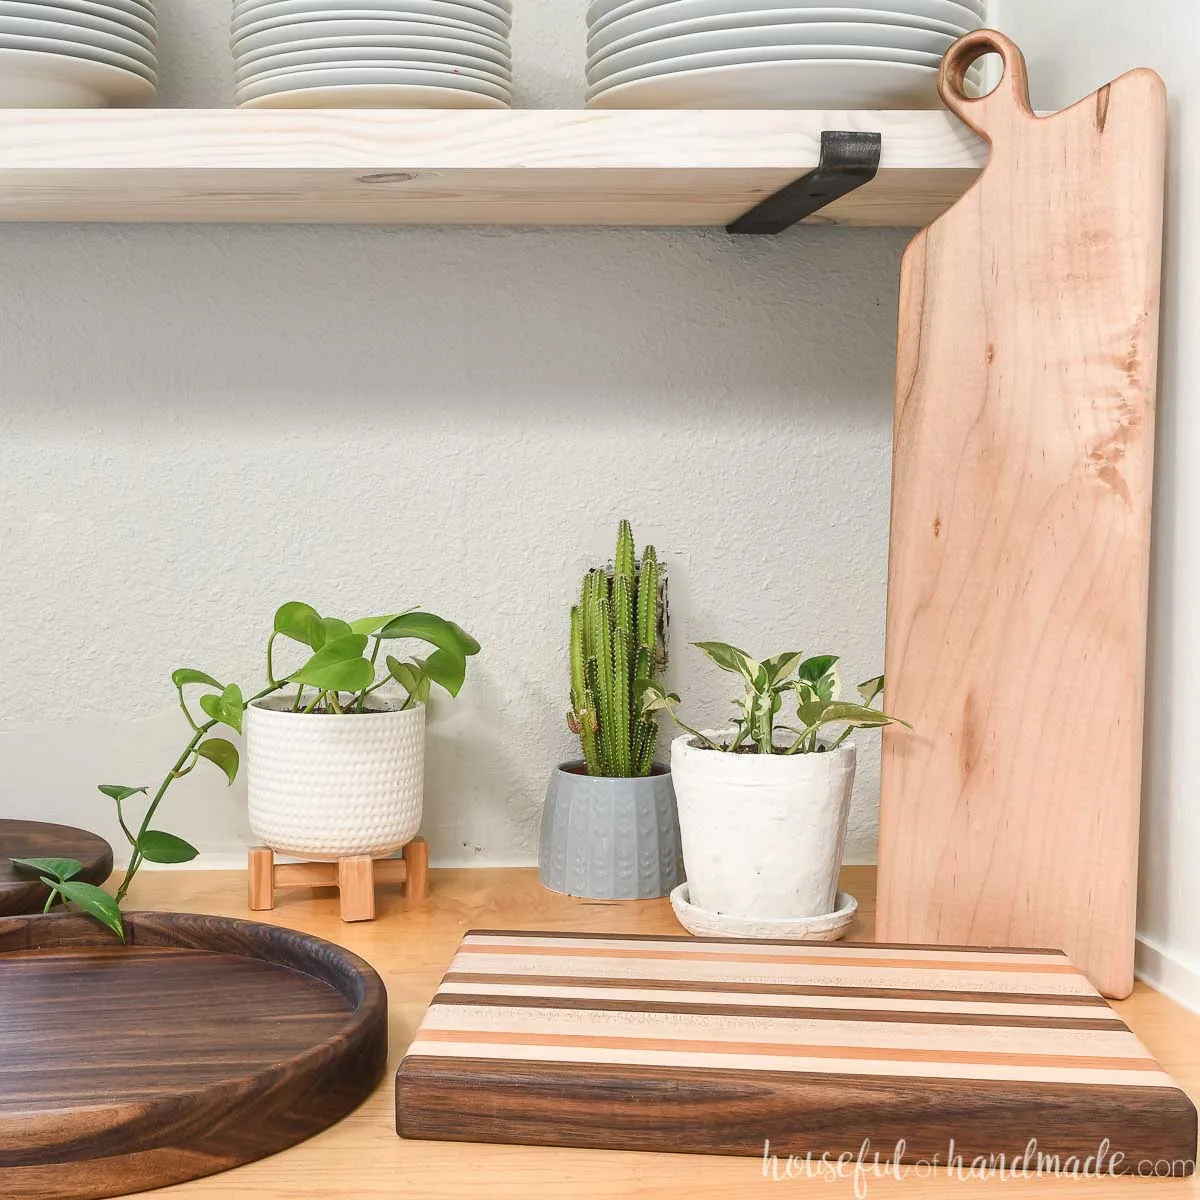 3 easy woodworking gifts: a charcuterie board, round serving tray, and edge grain cutting board, in a kitchen.